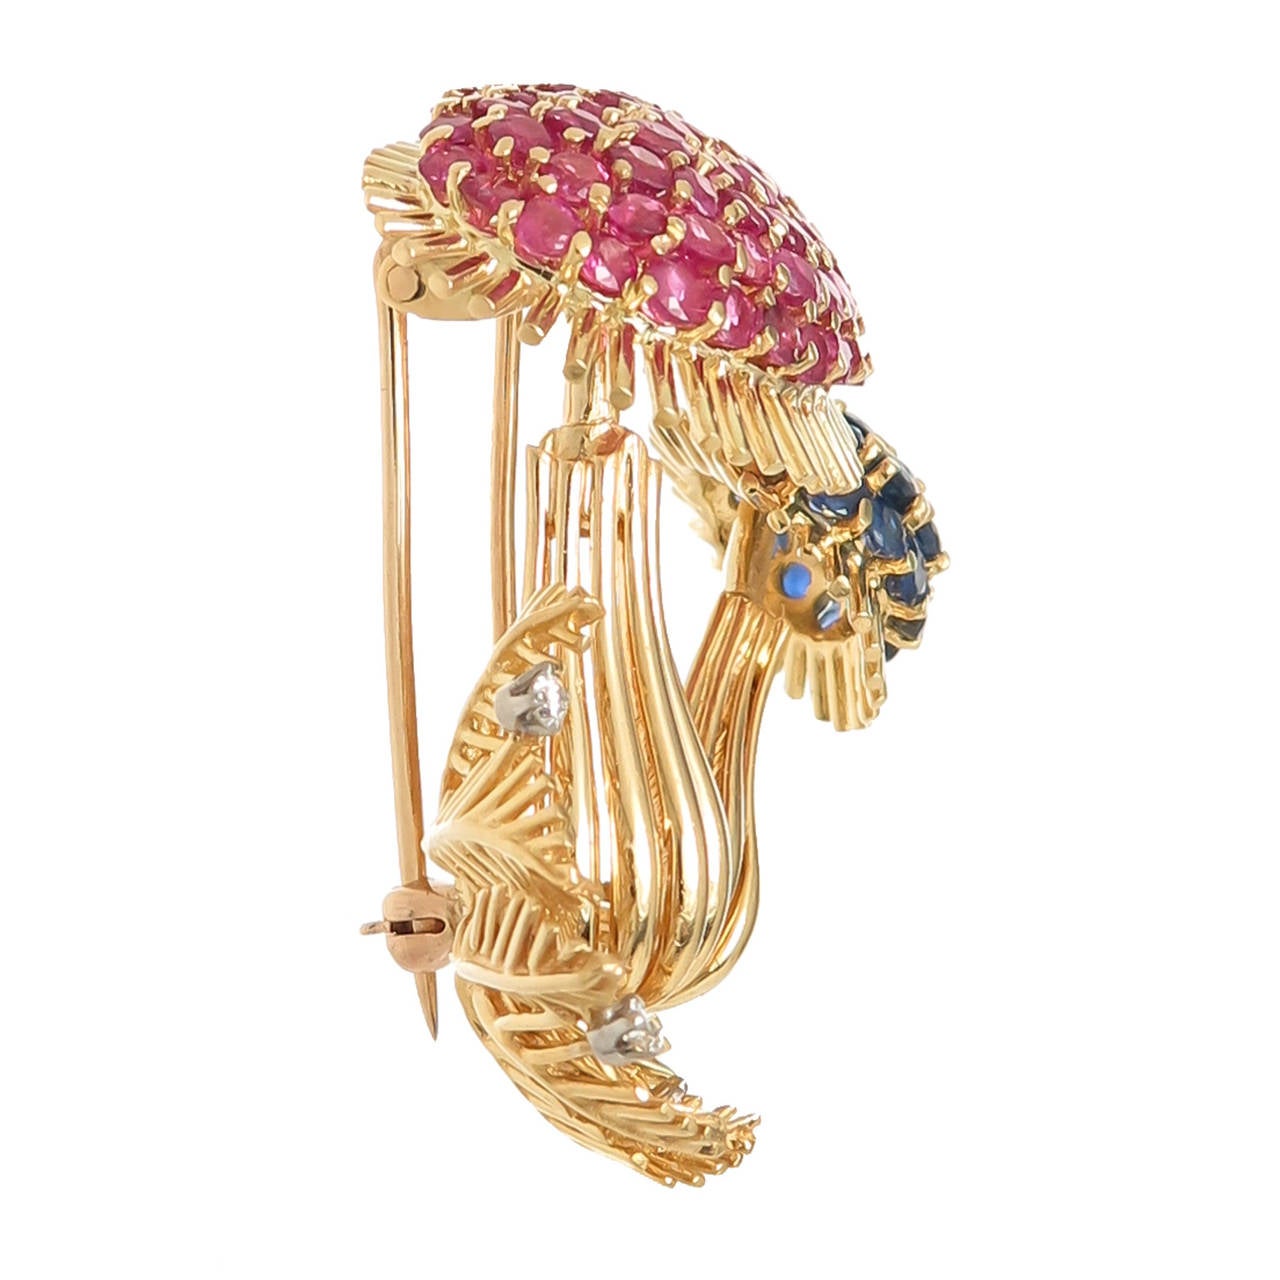 Circa 1970 18K yellow Gold Mushroom Clip Brooch by Tiffany & Company, very nicely detailed and set with Rubies, Sapphires and Diamonds. Measuring 1 5/8 X  1 3/8 Inch.